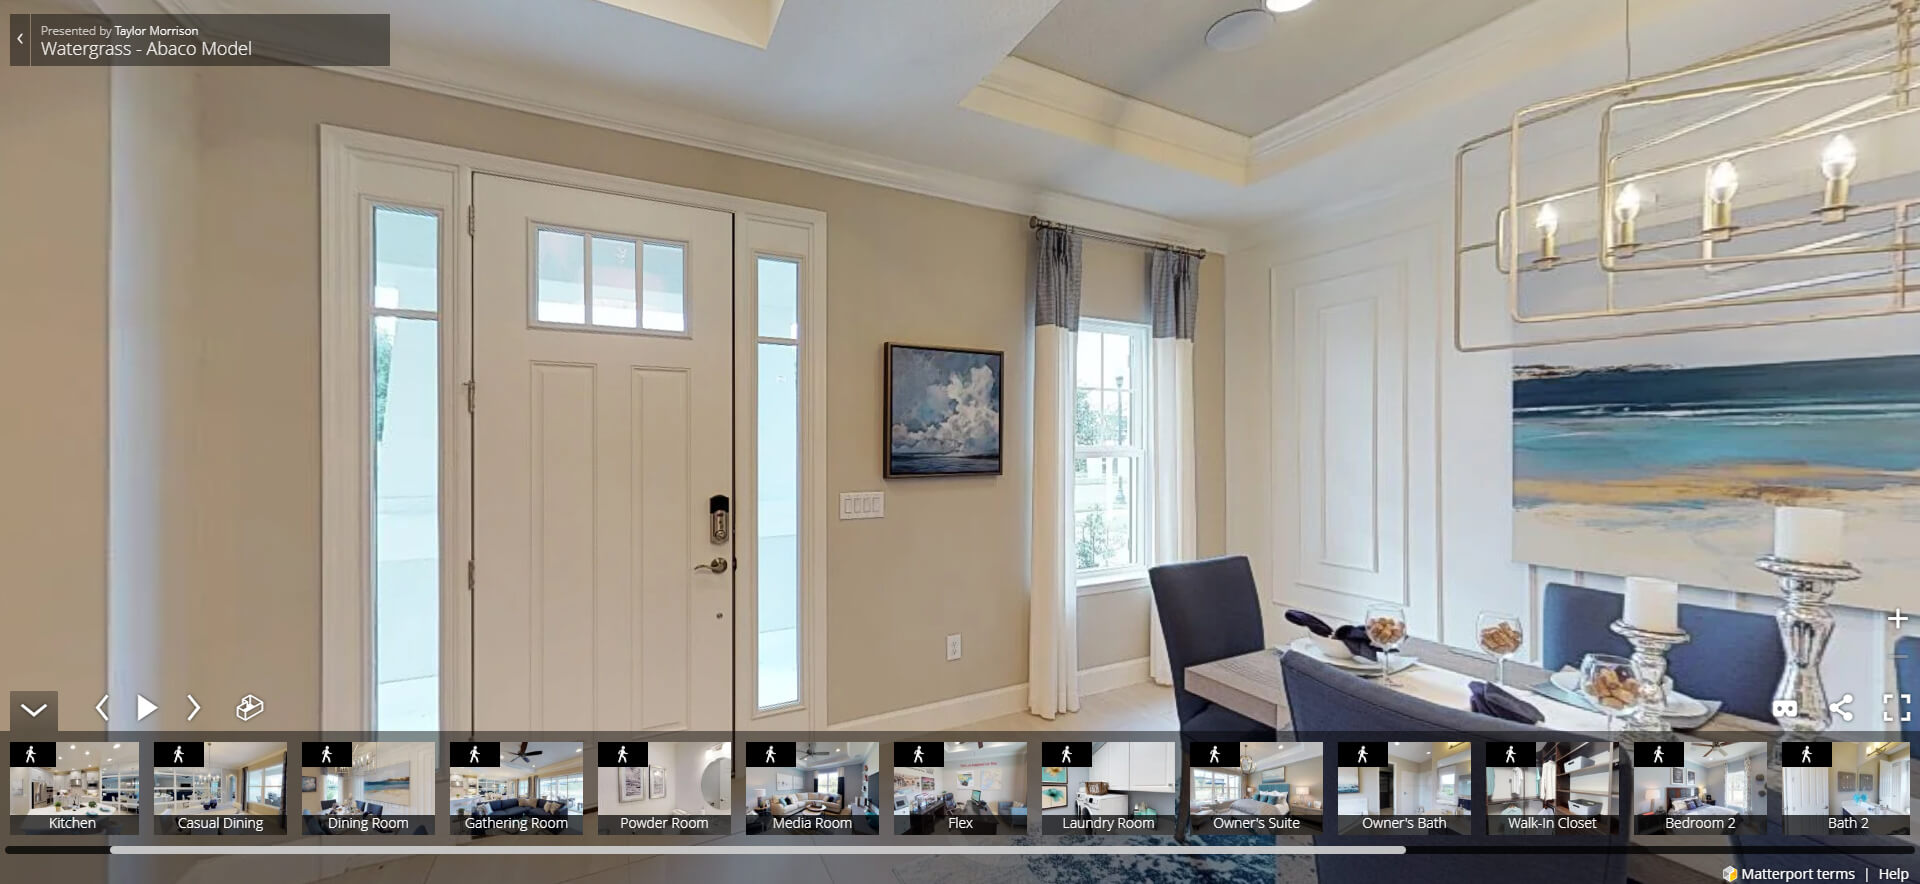 The virtual tour of the Abaco floorplan at WaterGrass in Wesley Chapel Florida provides a great example of how natural light can brighten an entryway.